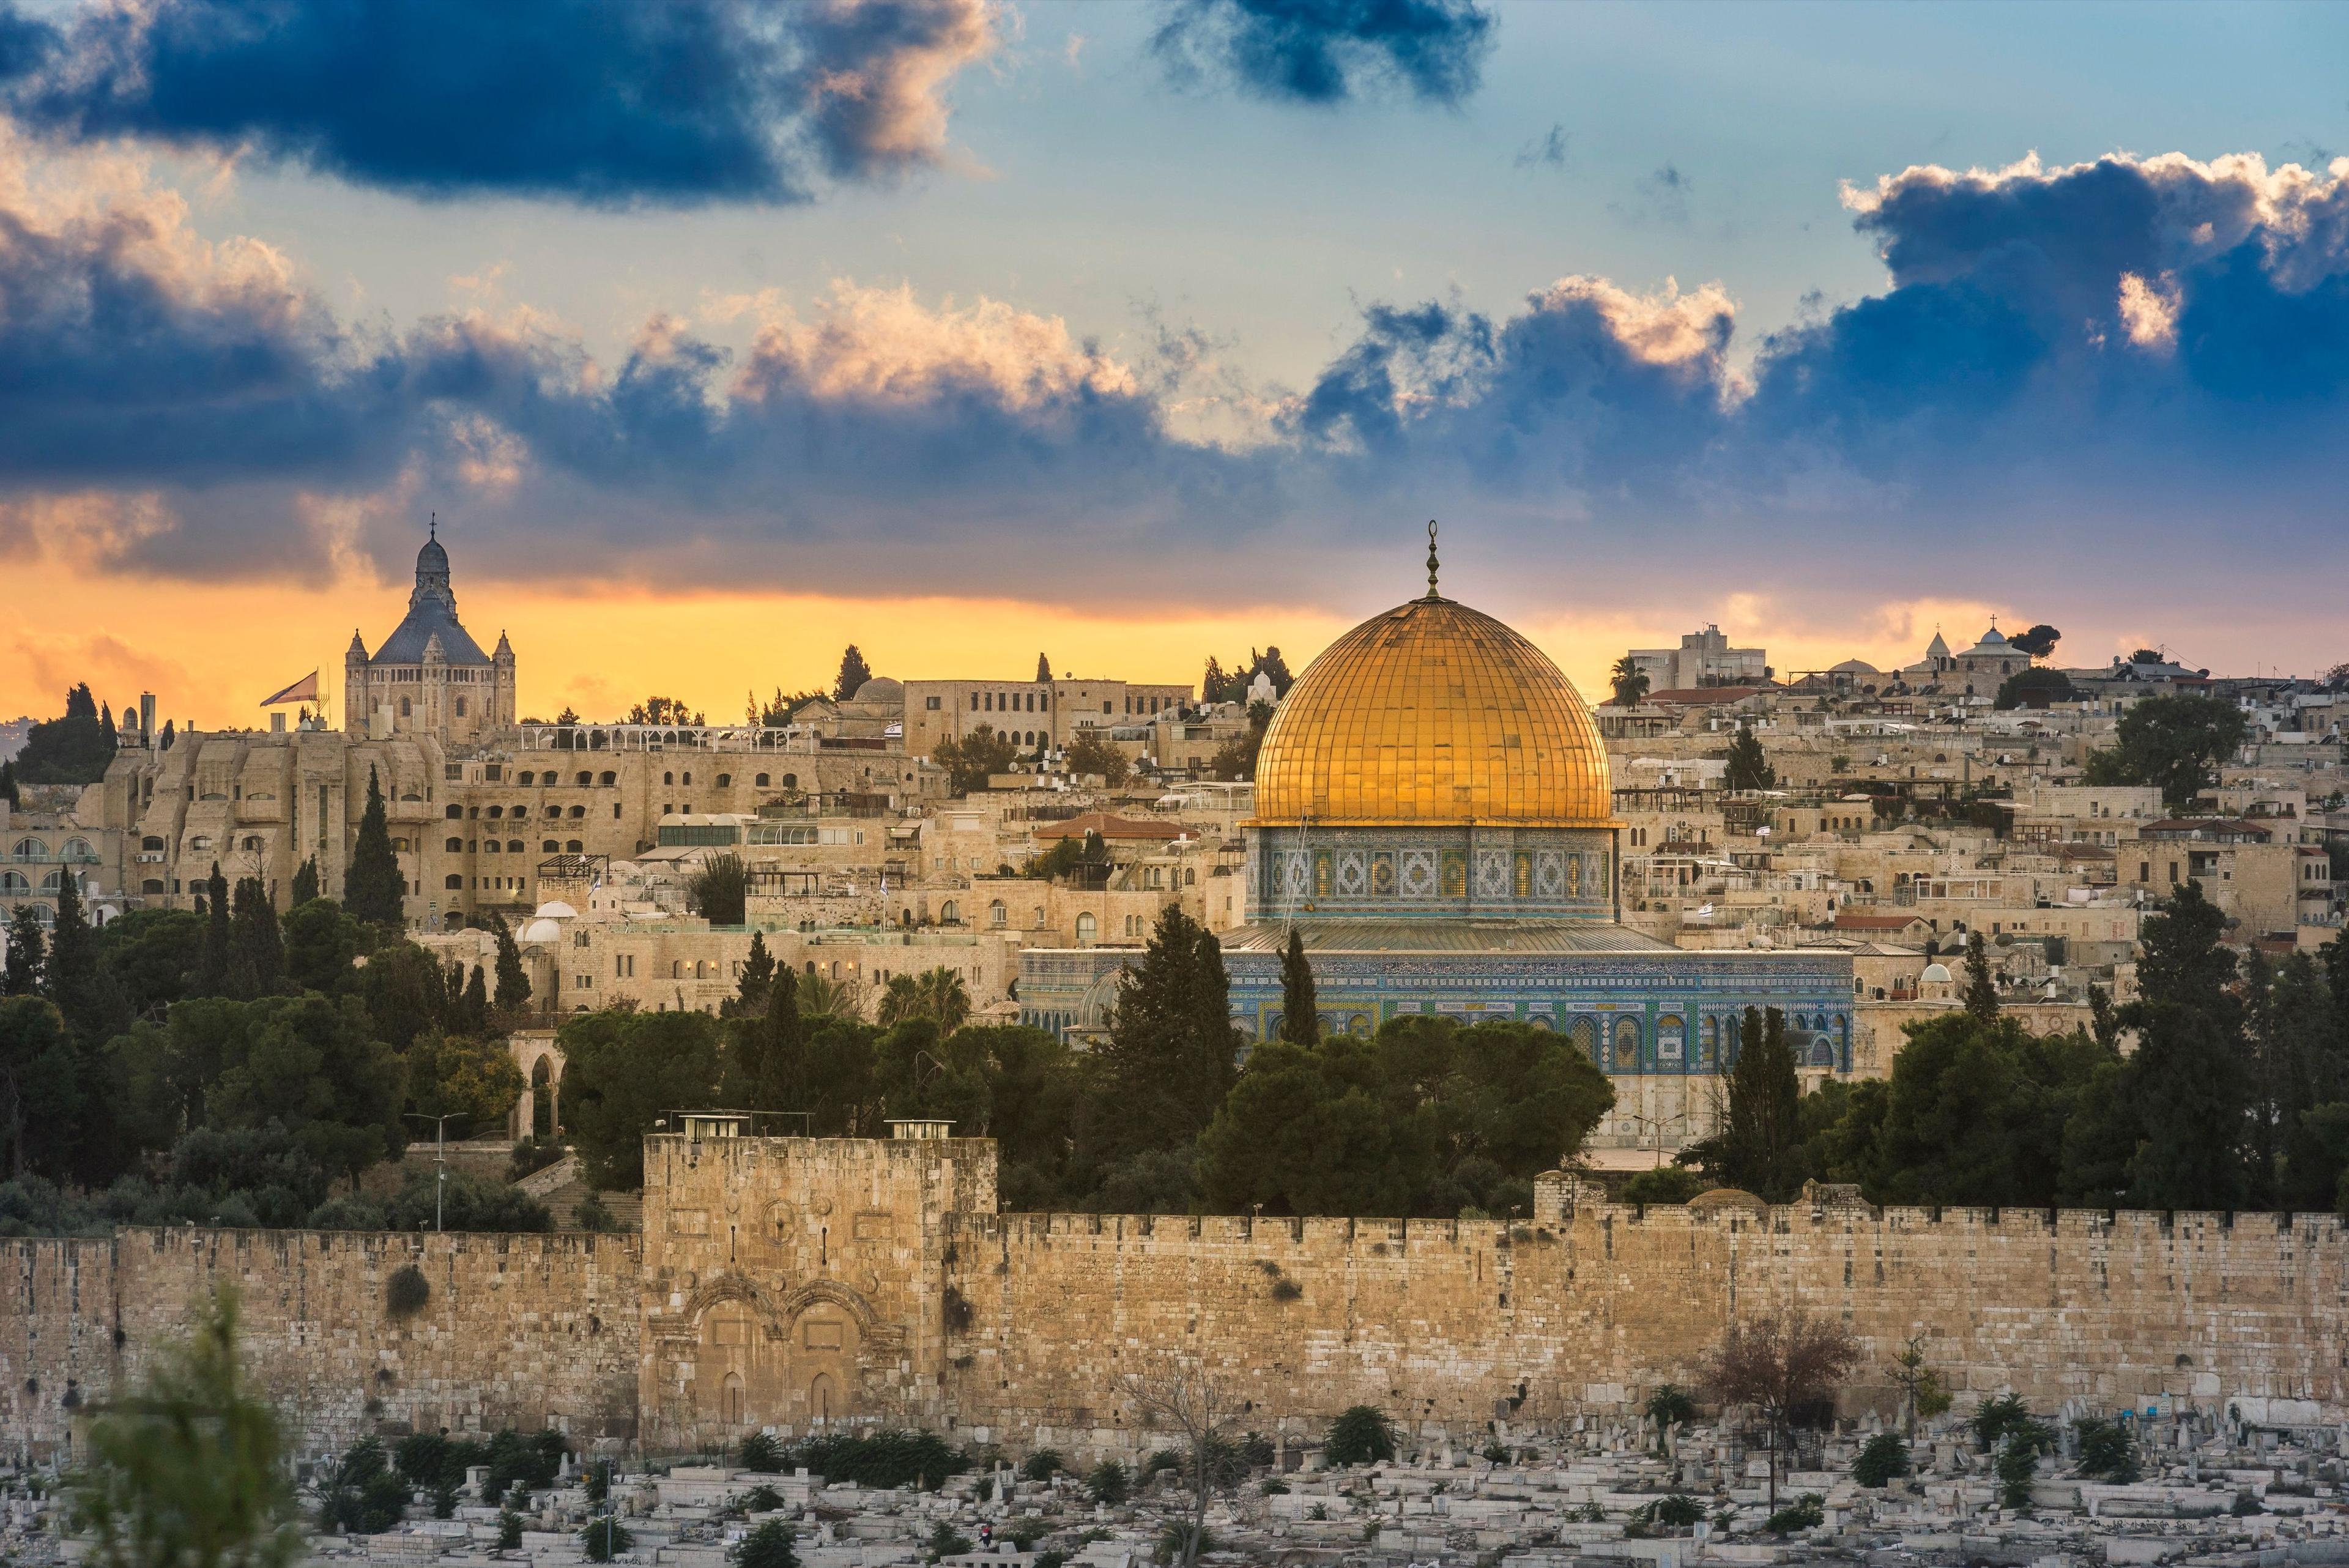 How Much Does A Trip to Israel Cost?